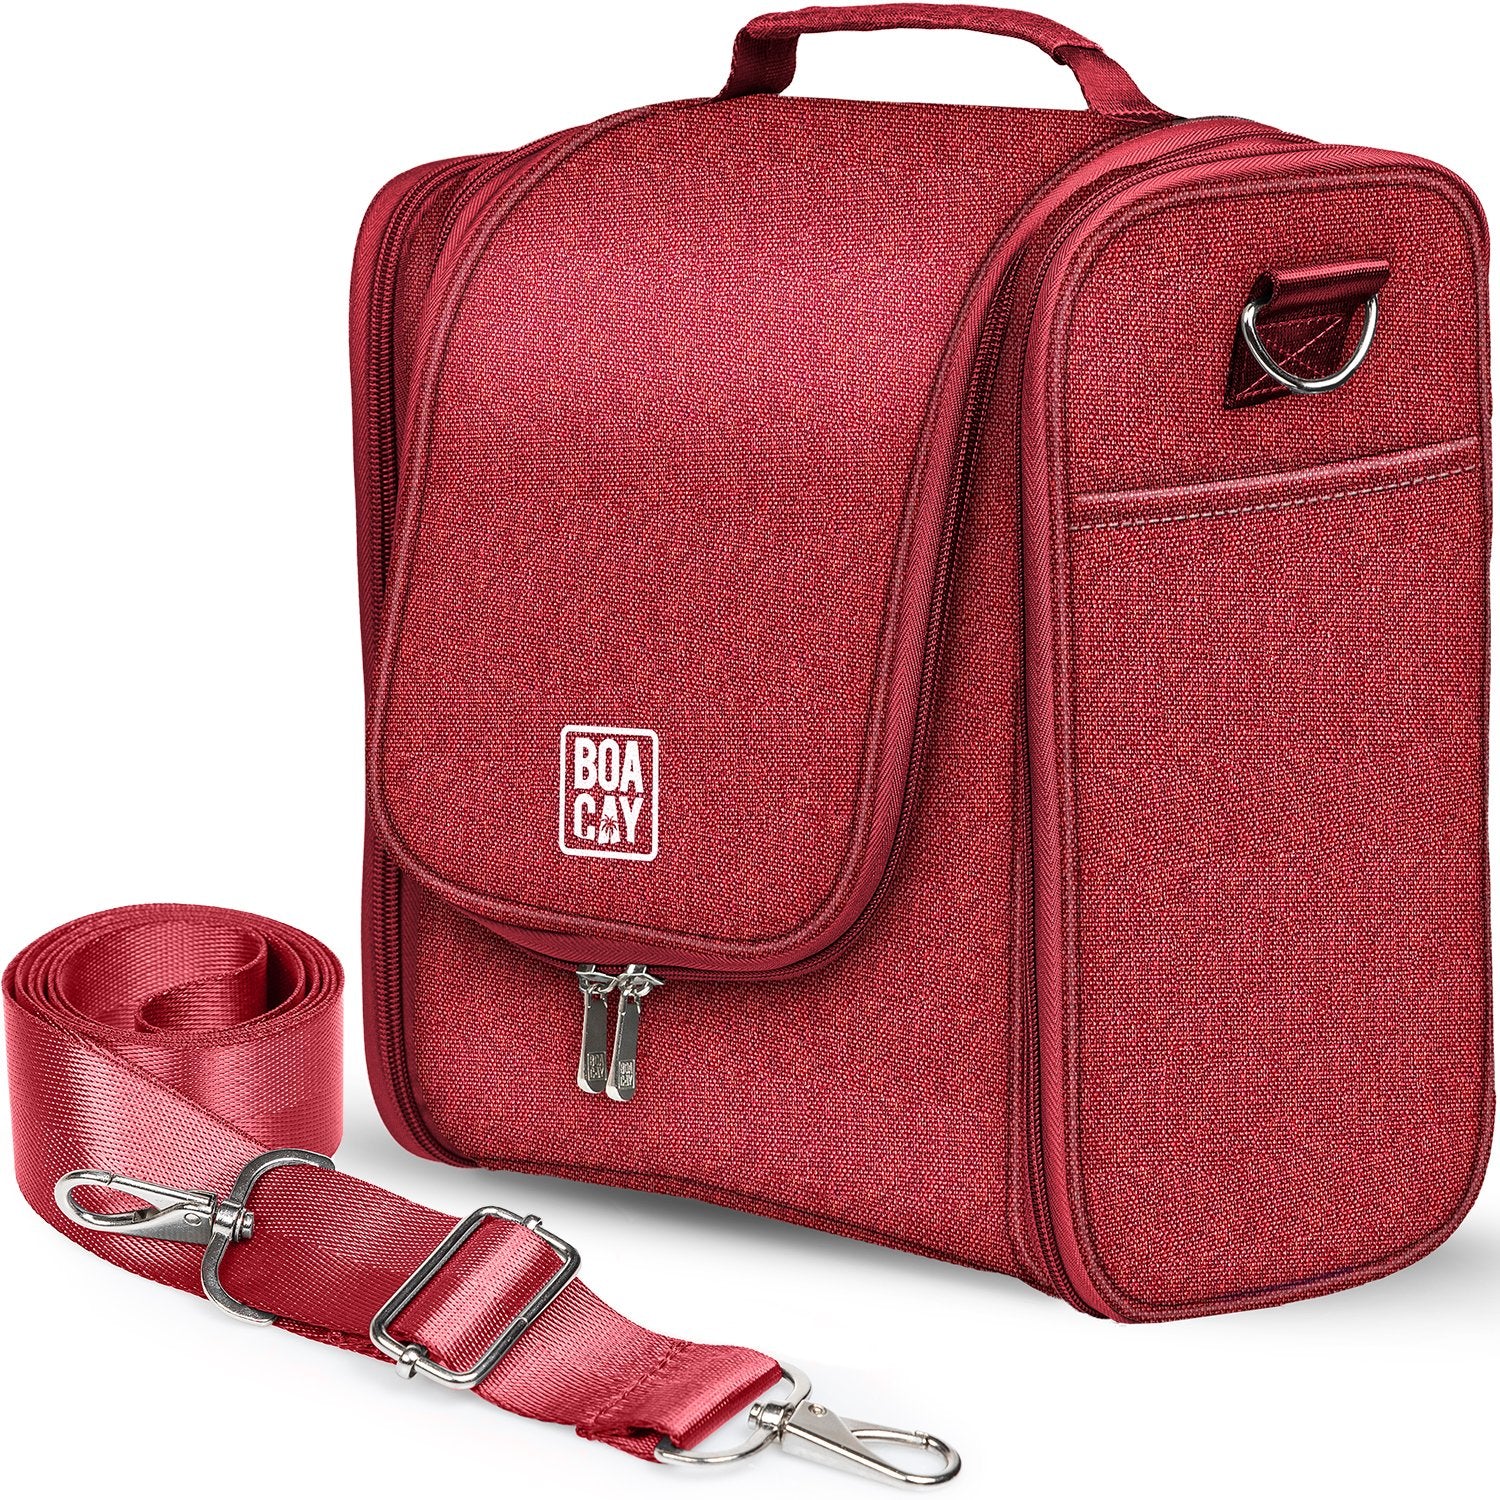 Red extra-large toiletry bag, Travel Toiletry Bags, toiletry travel bag, Toiletry Bags, best travel toiletry bag, hanging travel toiletry bag, travel bag for toiletries, travel toiletry bags, toiletries travel bag, mens travel toiletry bag, mens toiletry travel bag, travel toiletry bag for men 